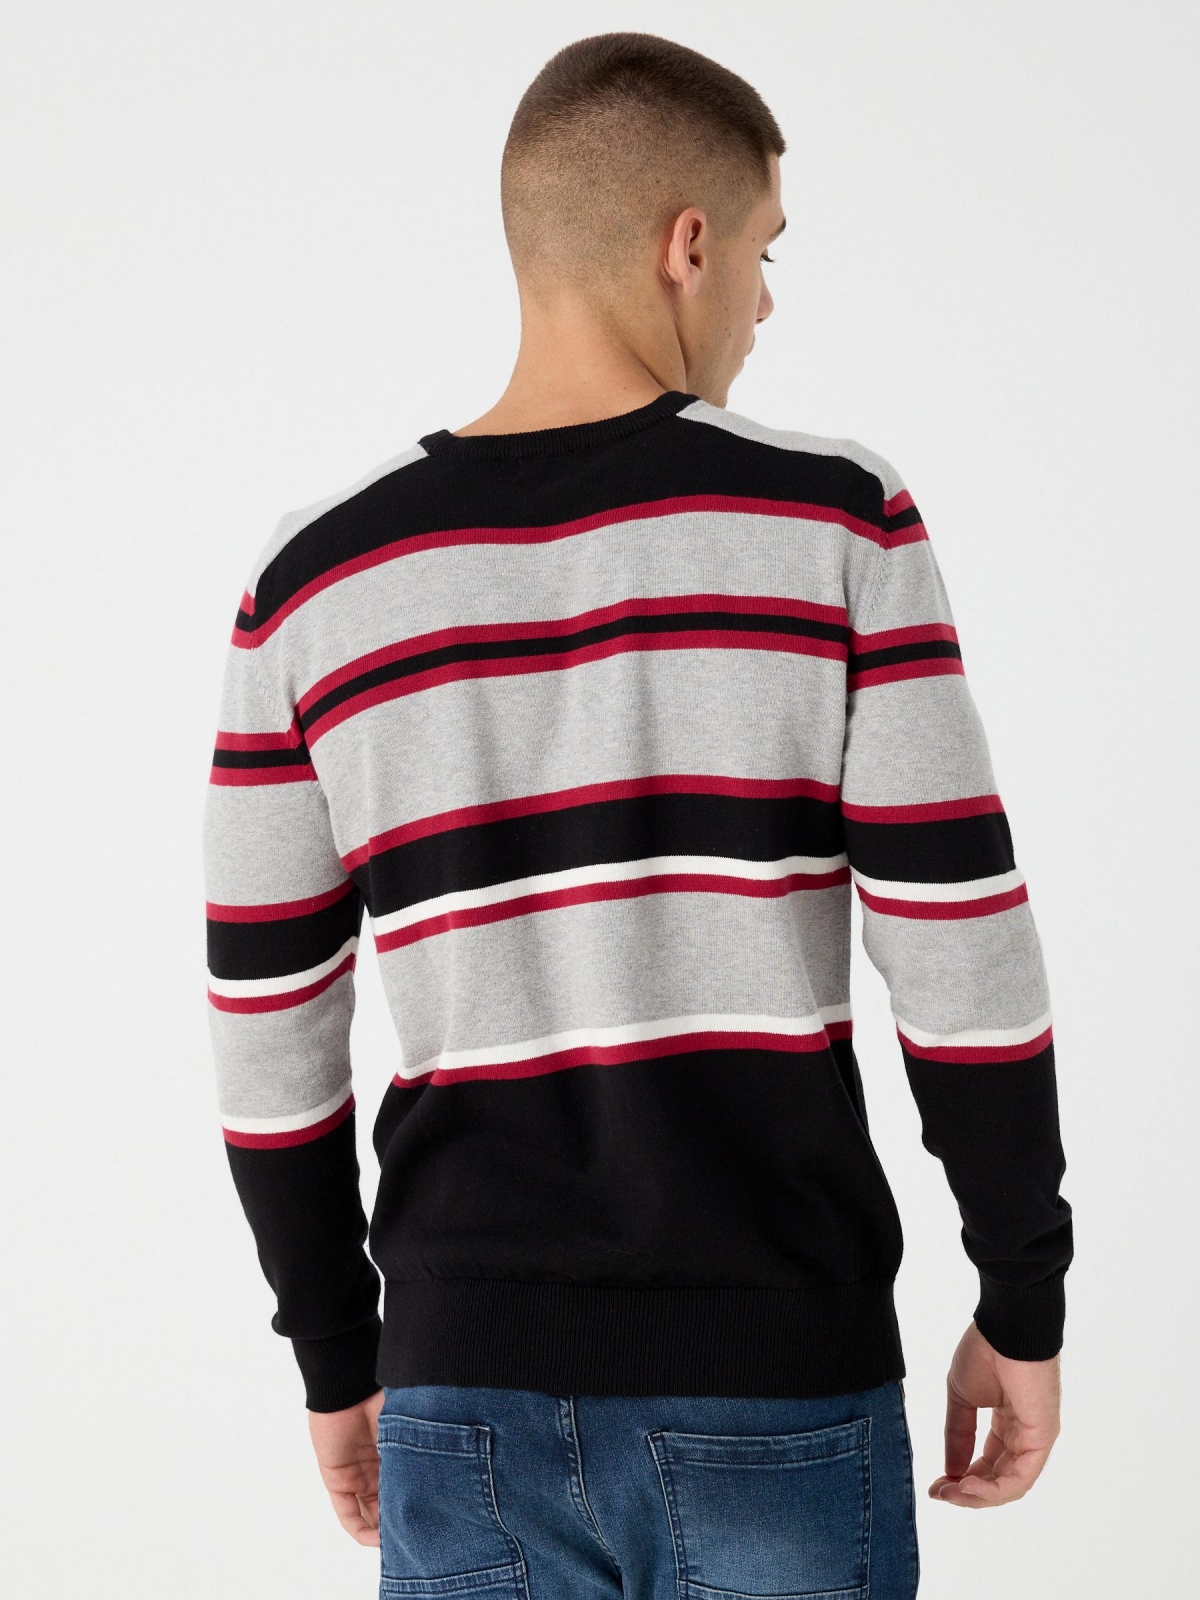 Striped knitted sweater black middle back view